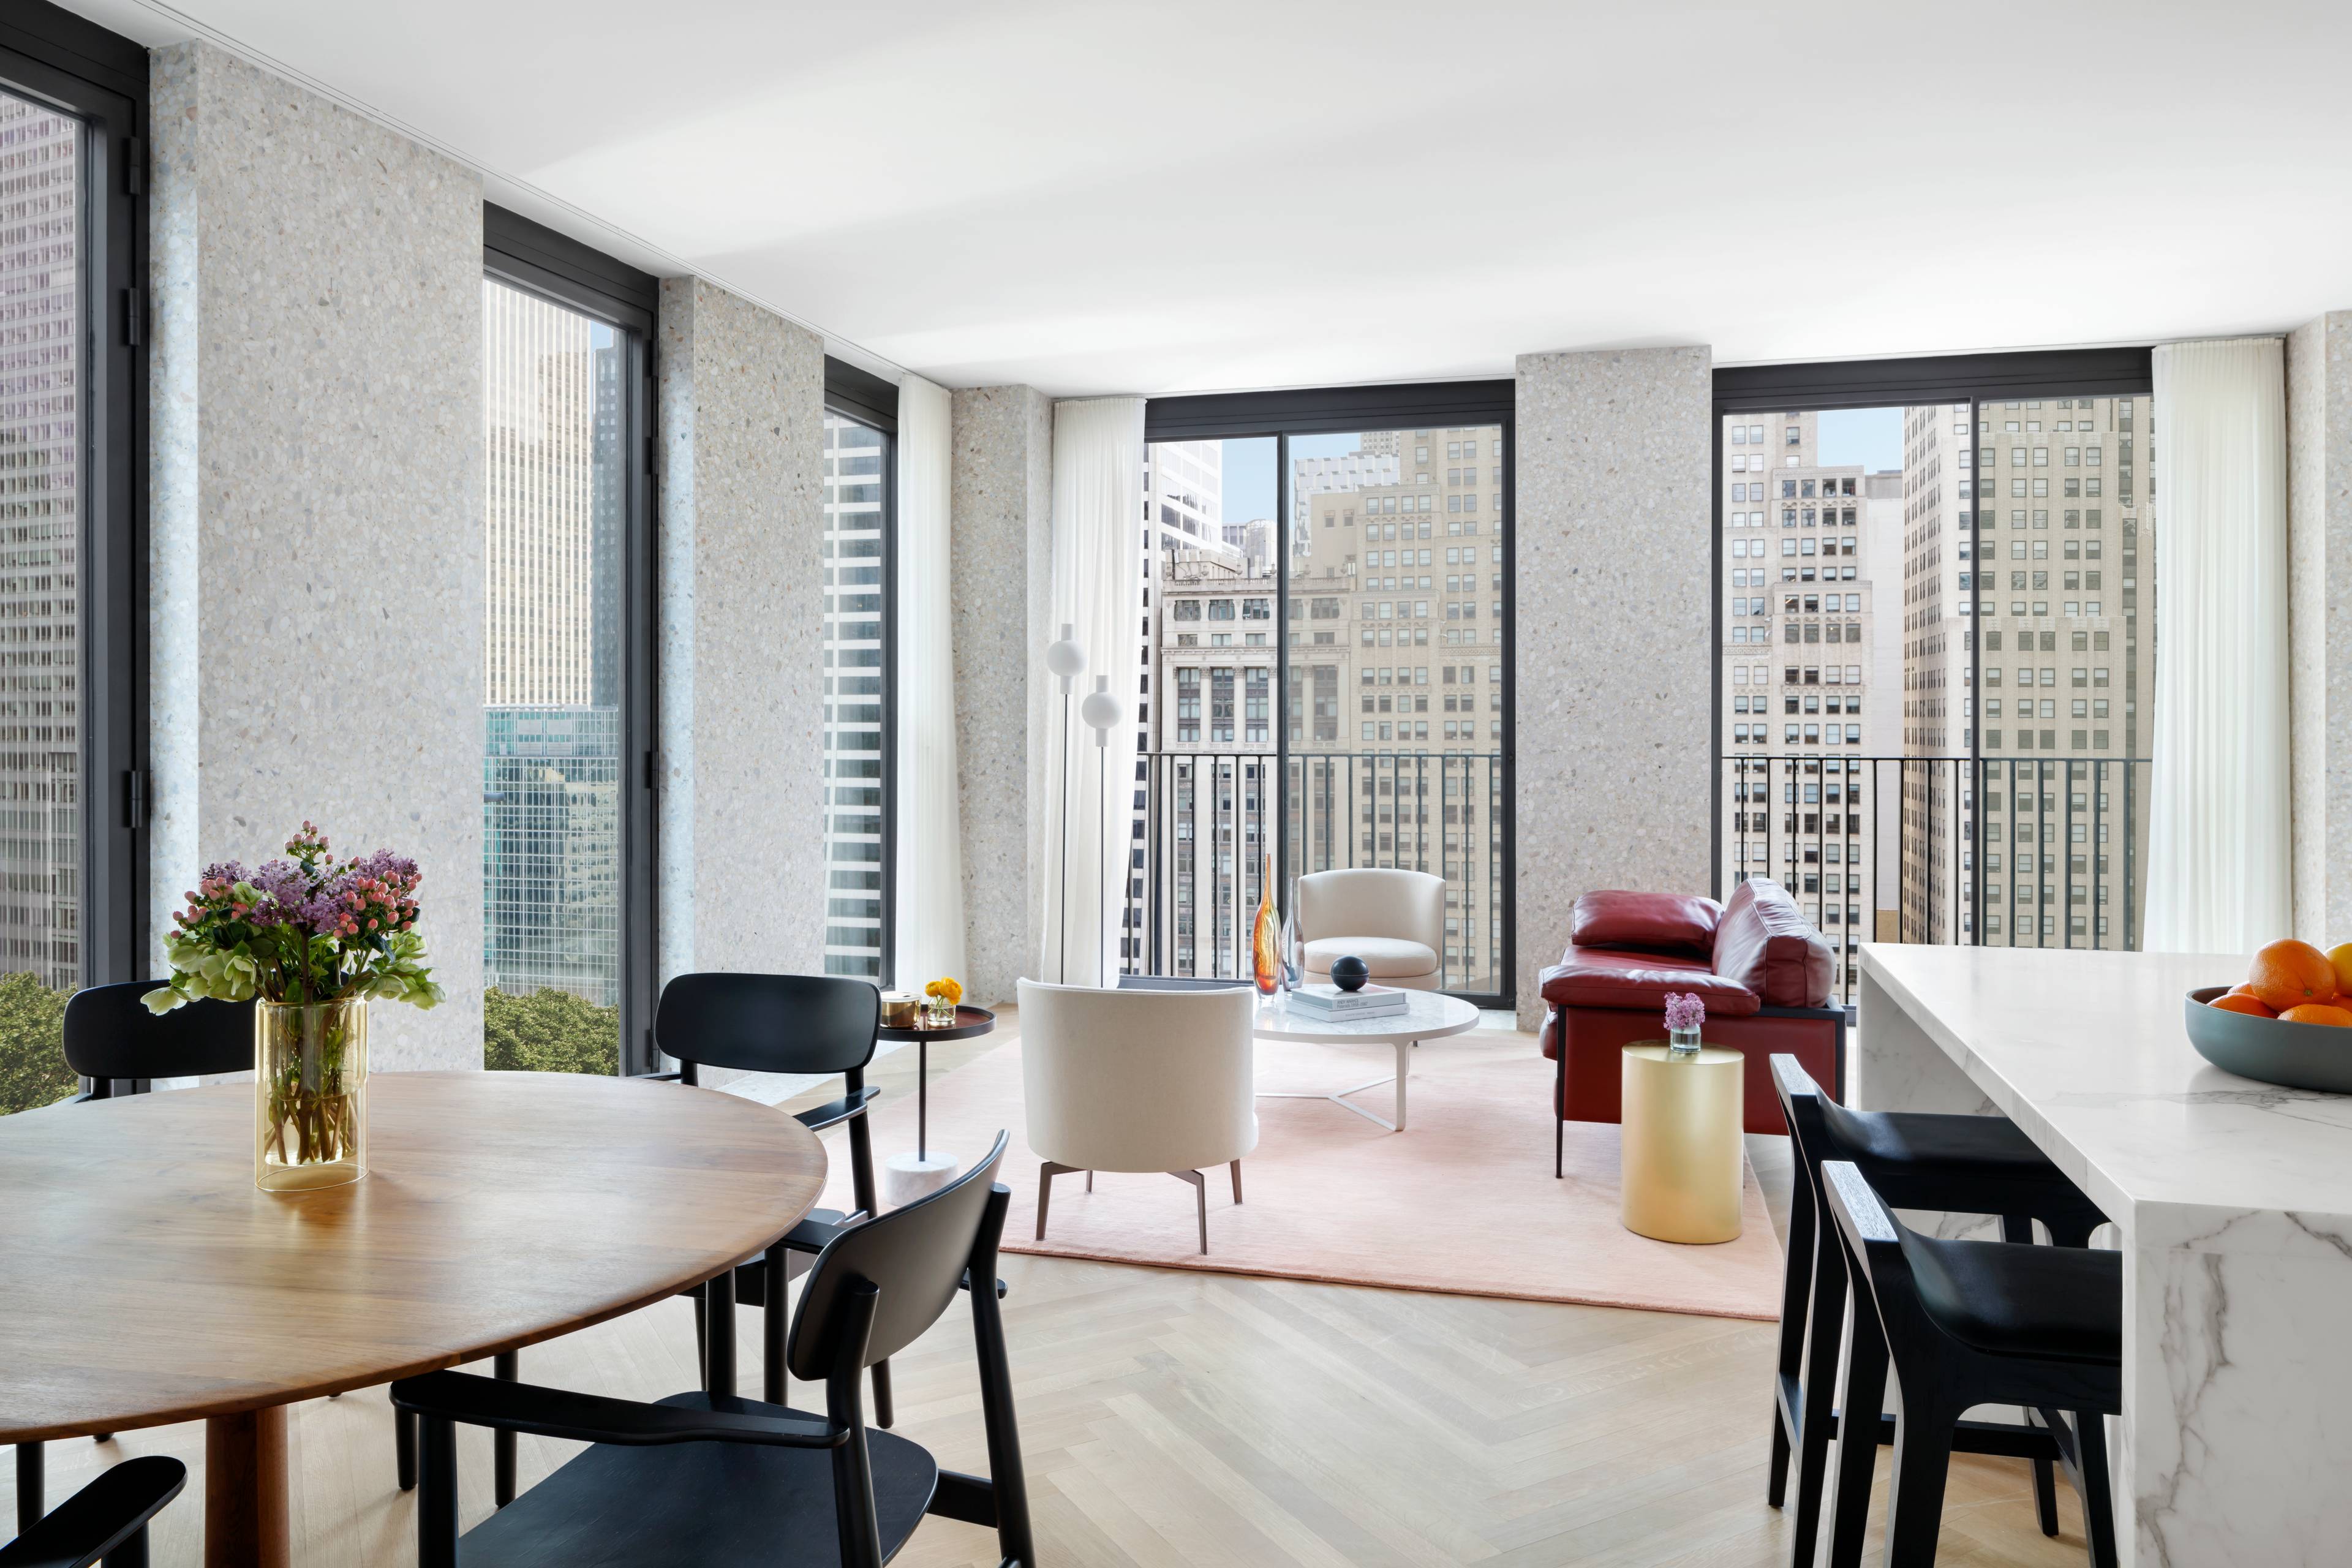 Located high above vibrant Bryant Park in the heart of New York City, this corner two bedroom residence, designed by David Chipperfield Architects, wraps the northwest corner with fourteen floor ...